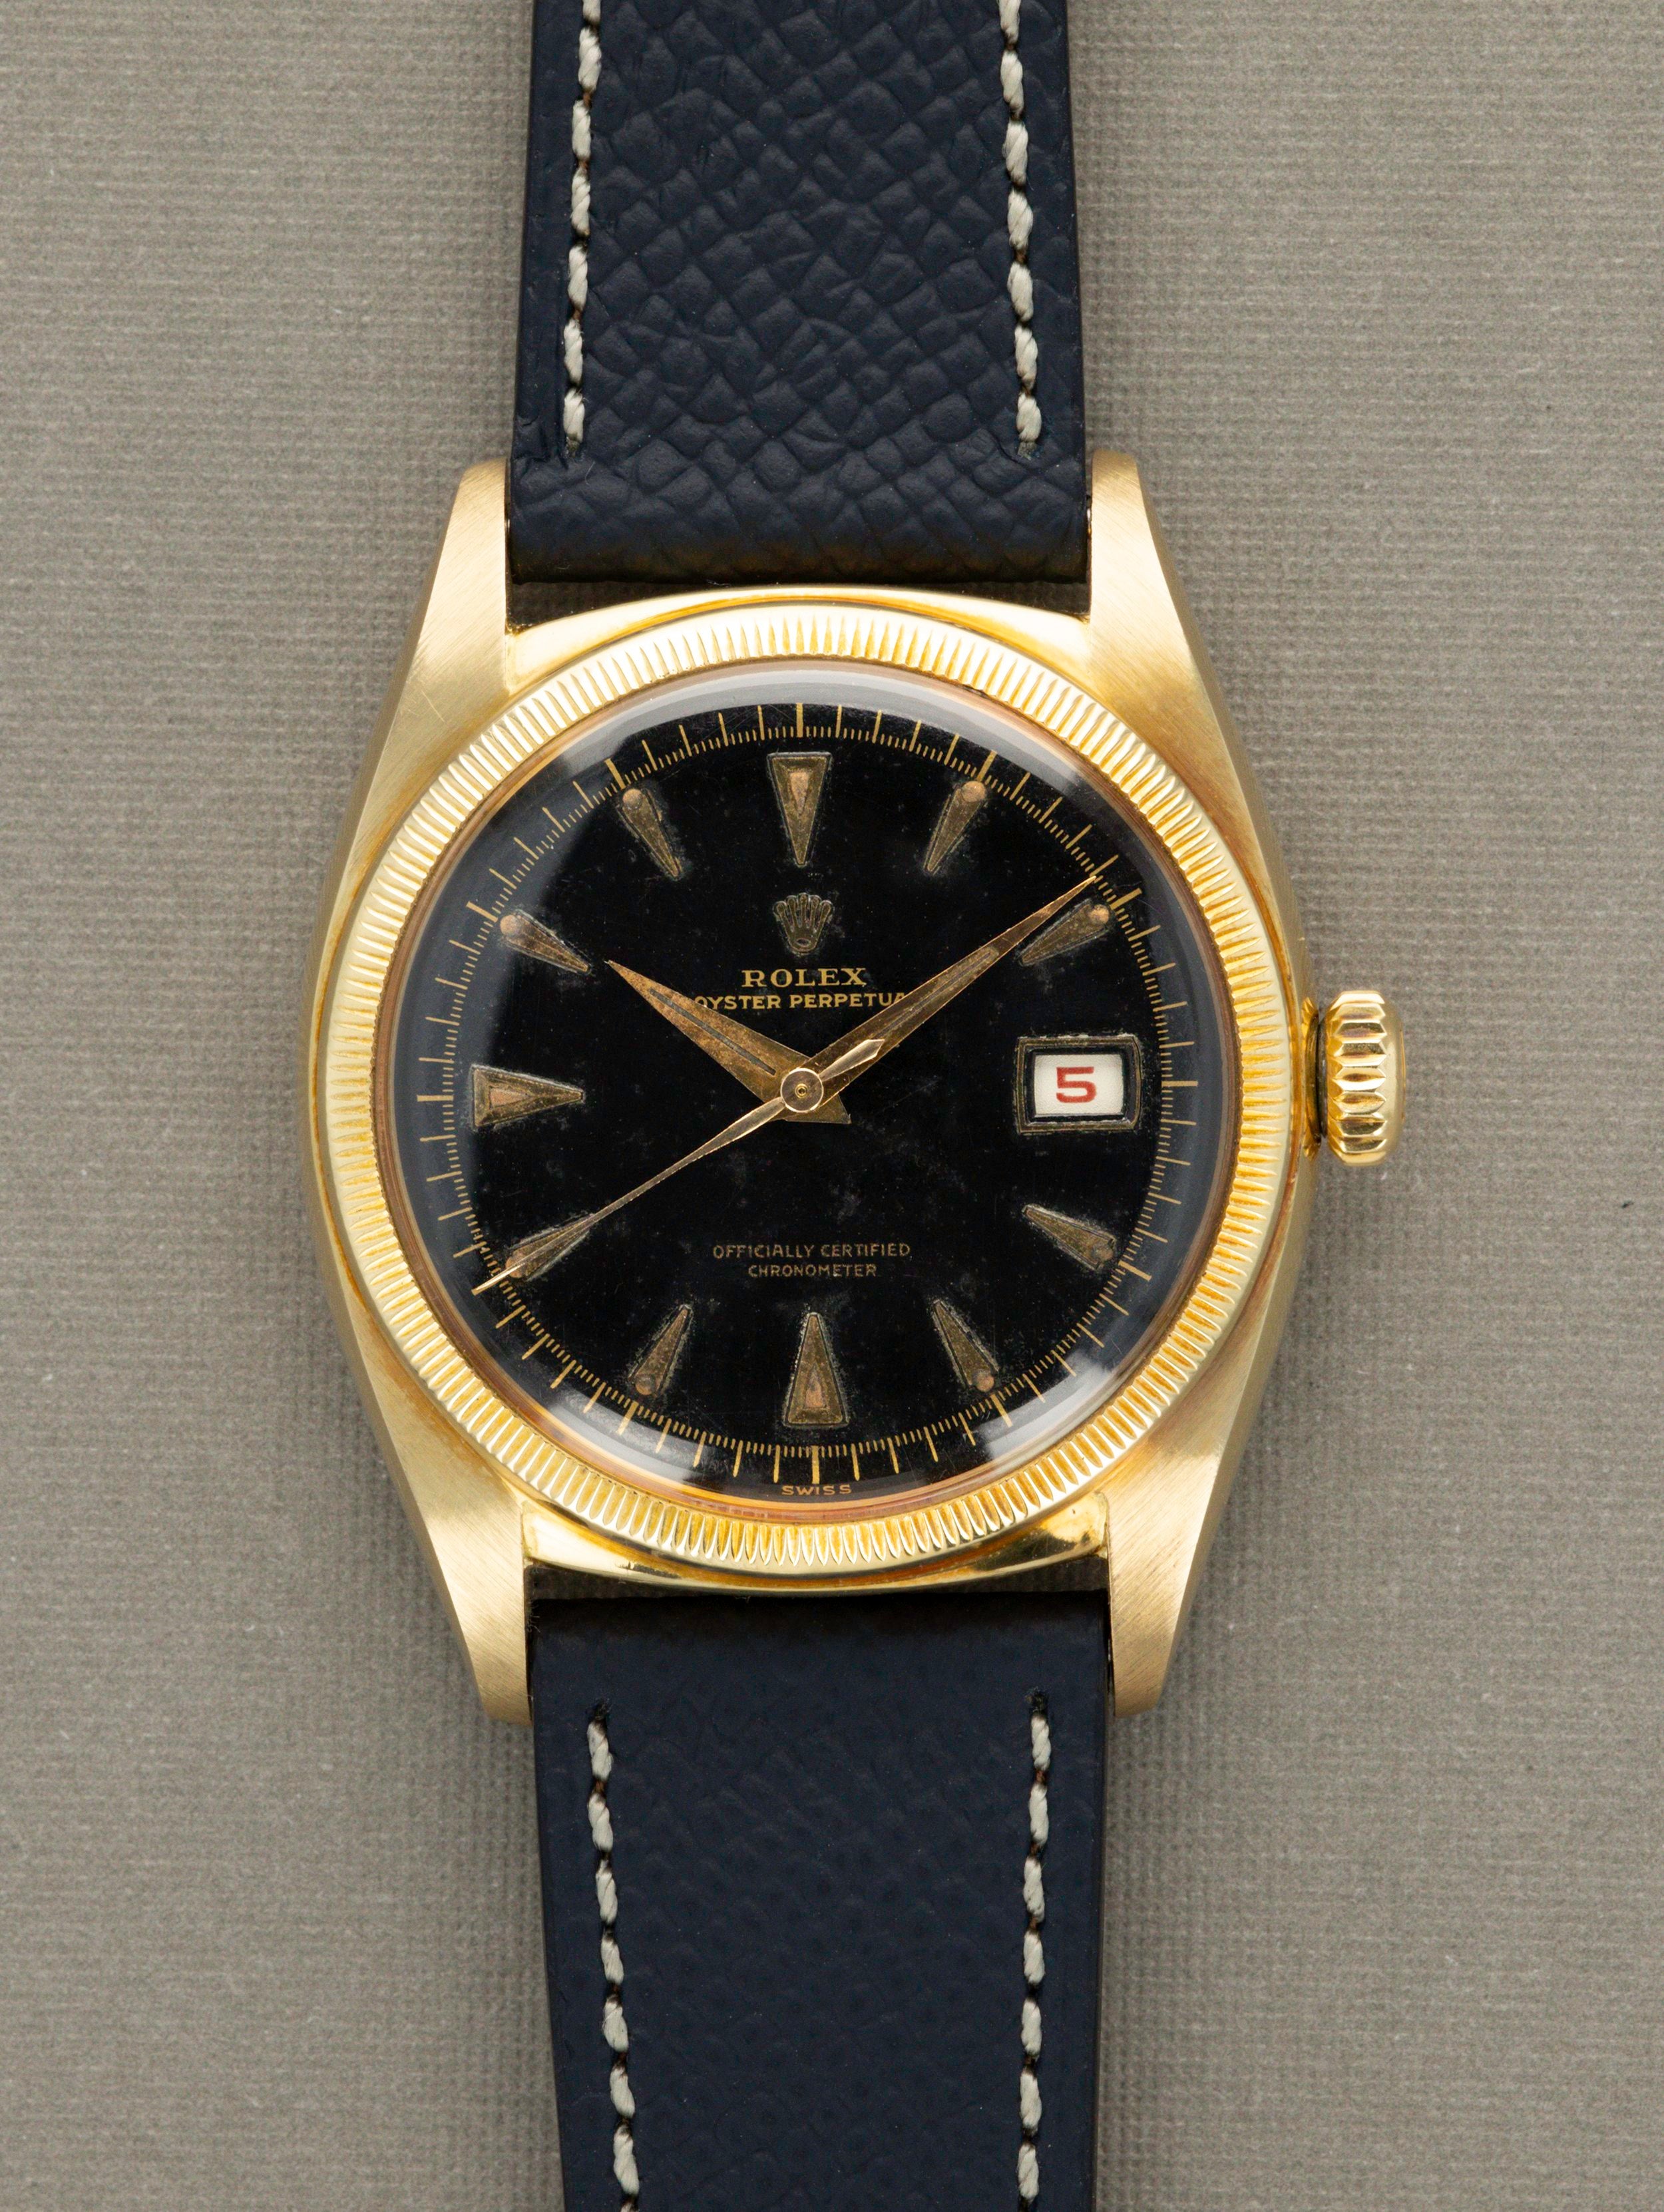 Rolex Datejust Ref 6105 - Ovettone with Black Gilt Dial